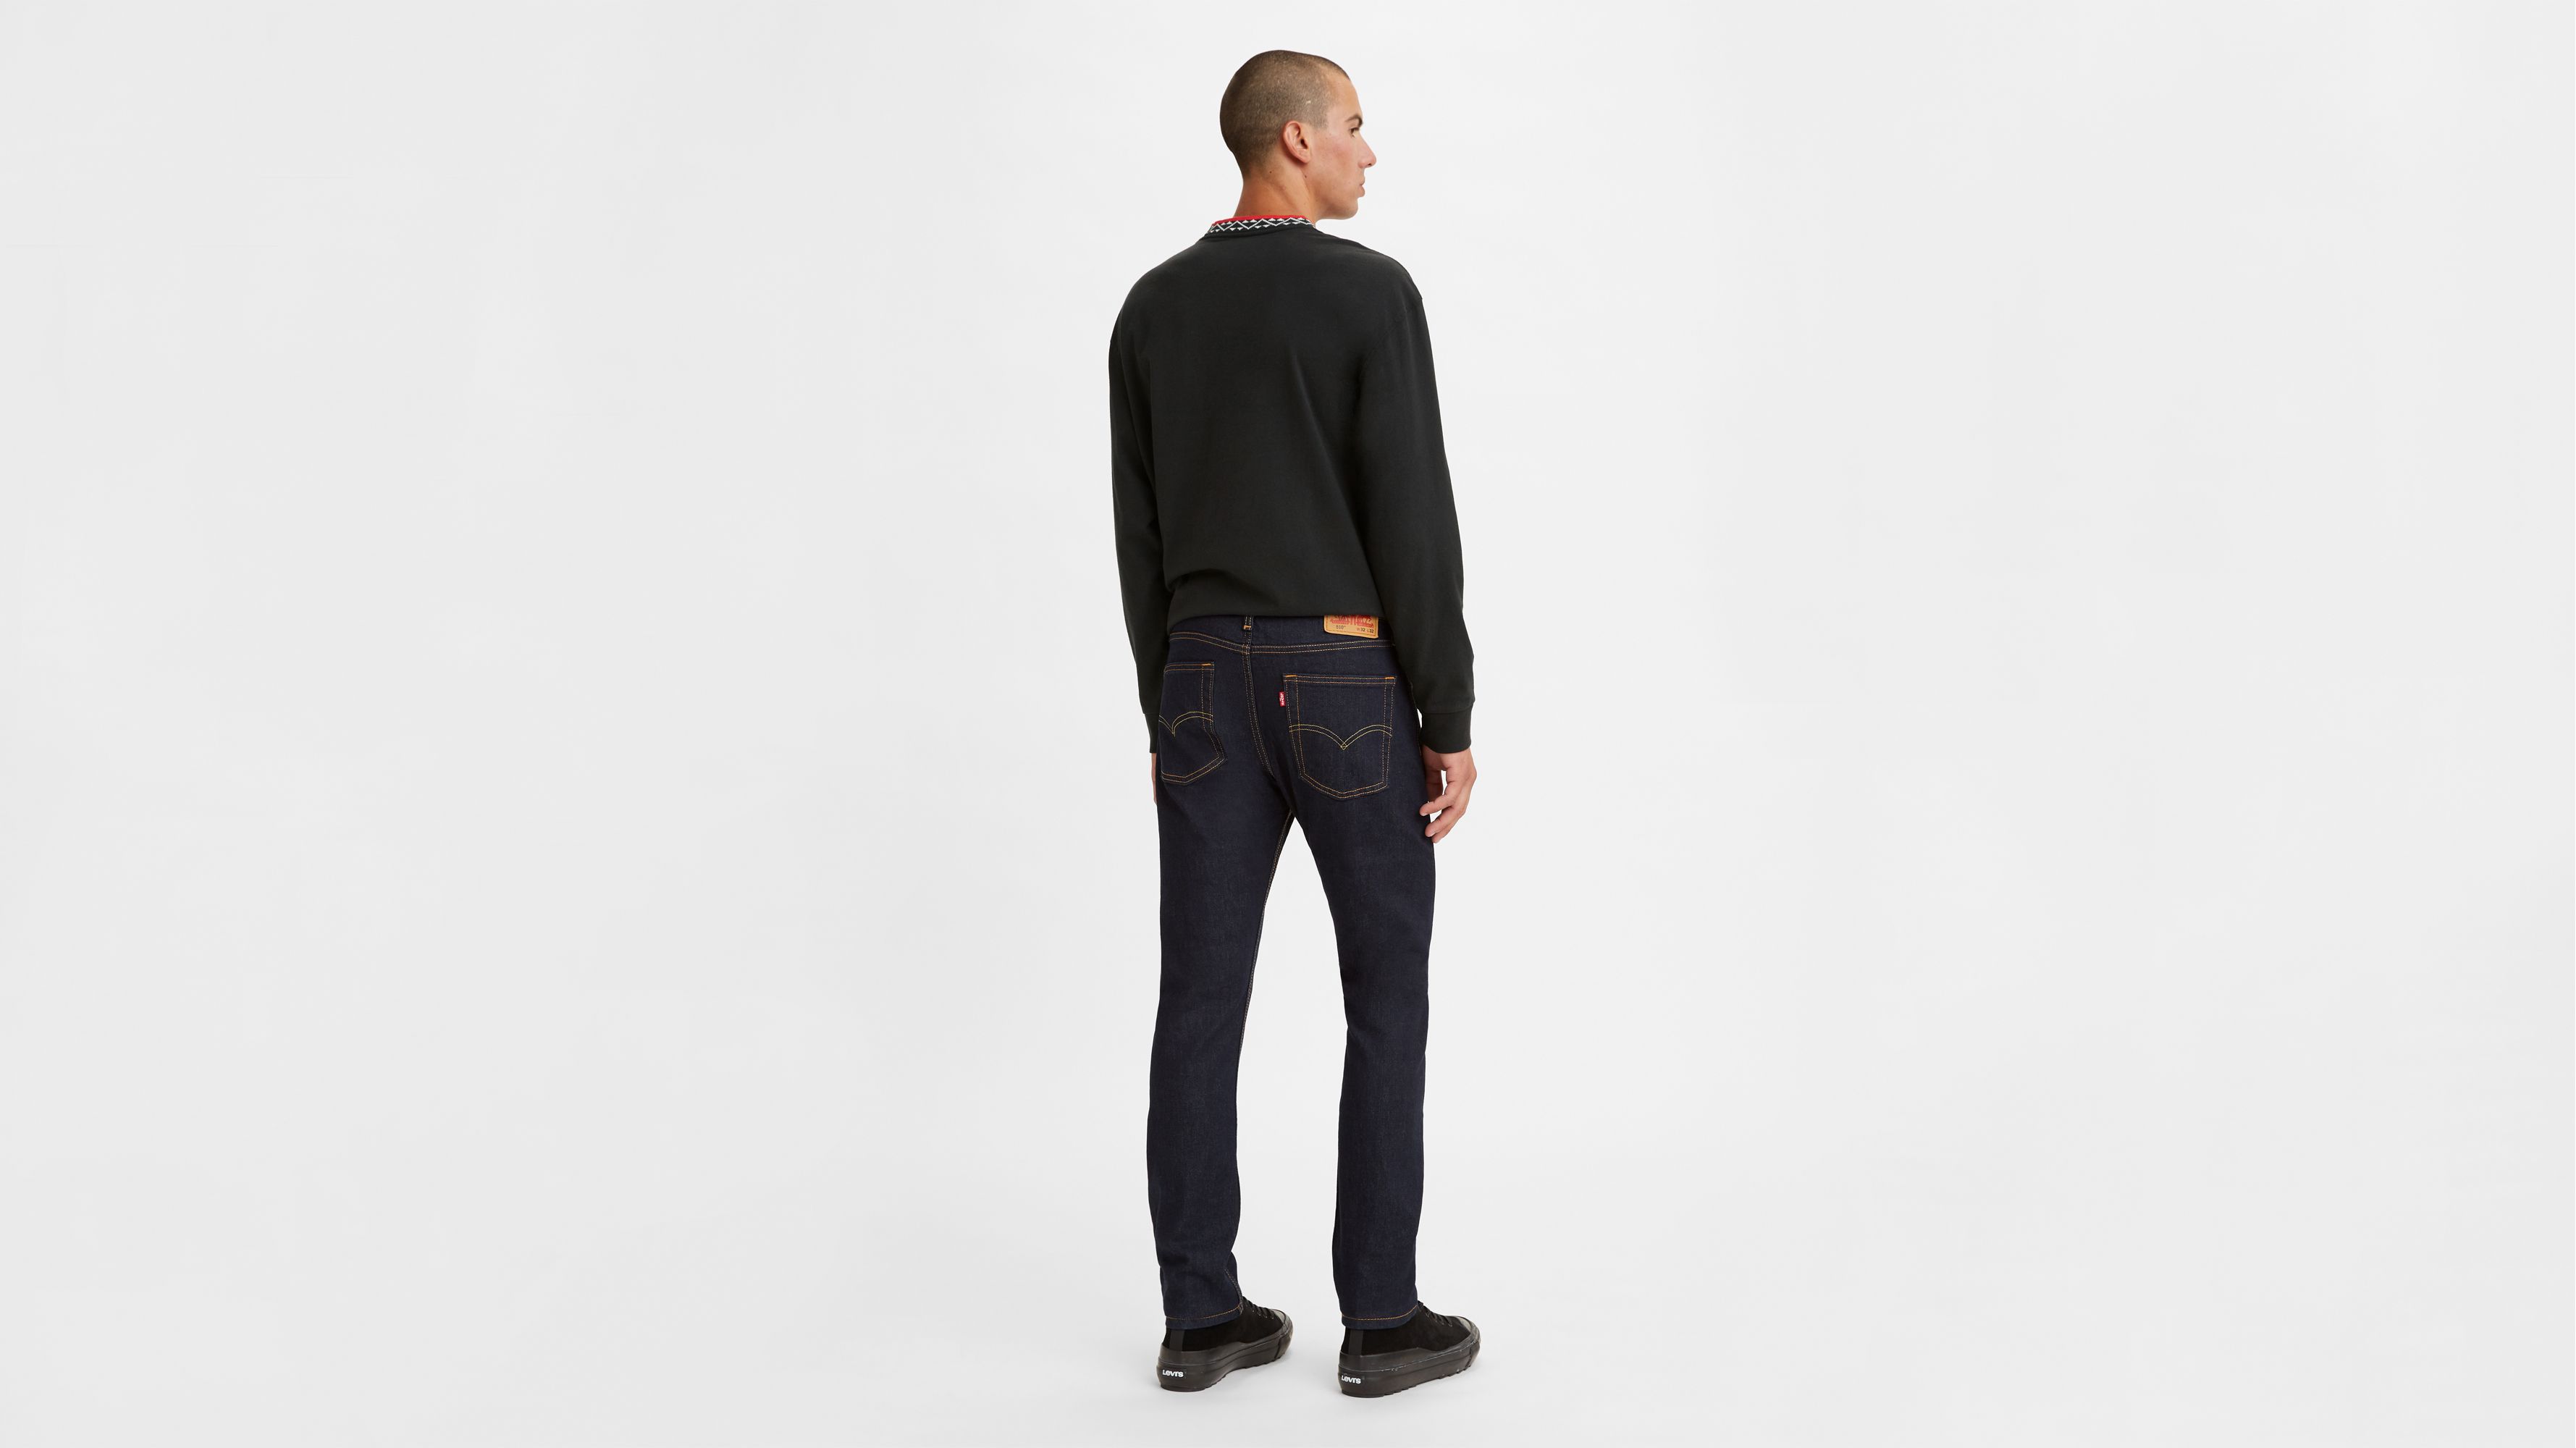 510 skinny fit jeans